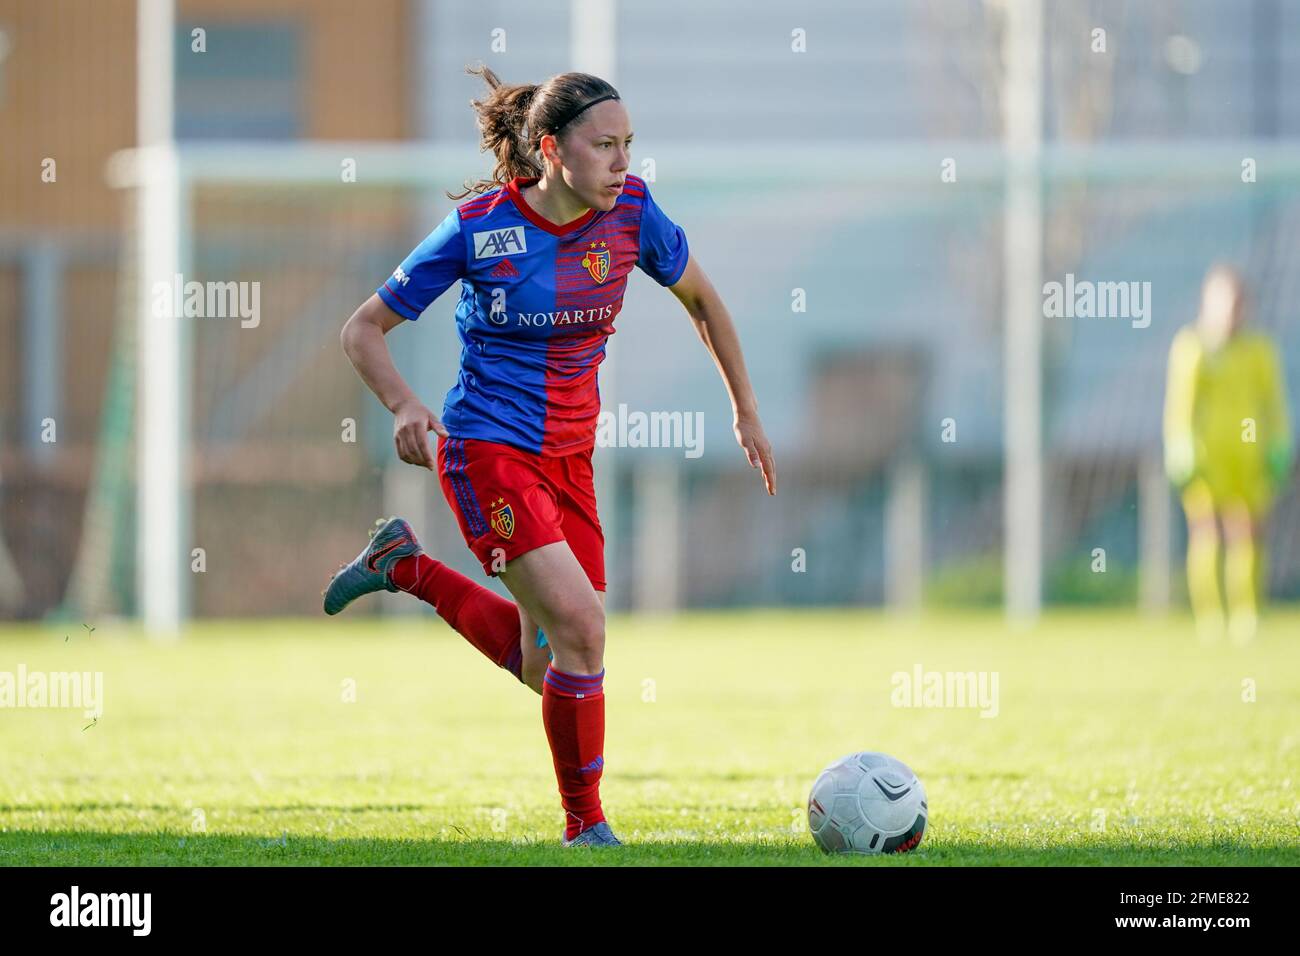 St. Gallen, Switzerland. 08th May, 2021. May 8th, 2021, St. Gallen,  Espenmoos Stadium, AXA Women's Super League: FC St.Gallen-Staad - FC Basel  1893, # 15 Marion Rey (Basel) in action, on the